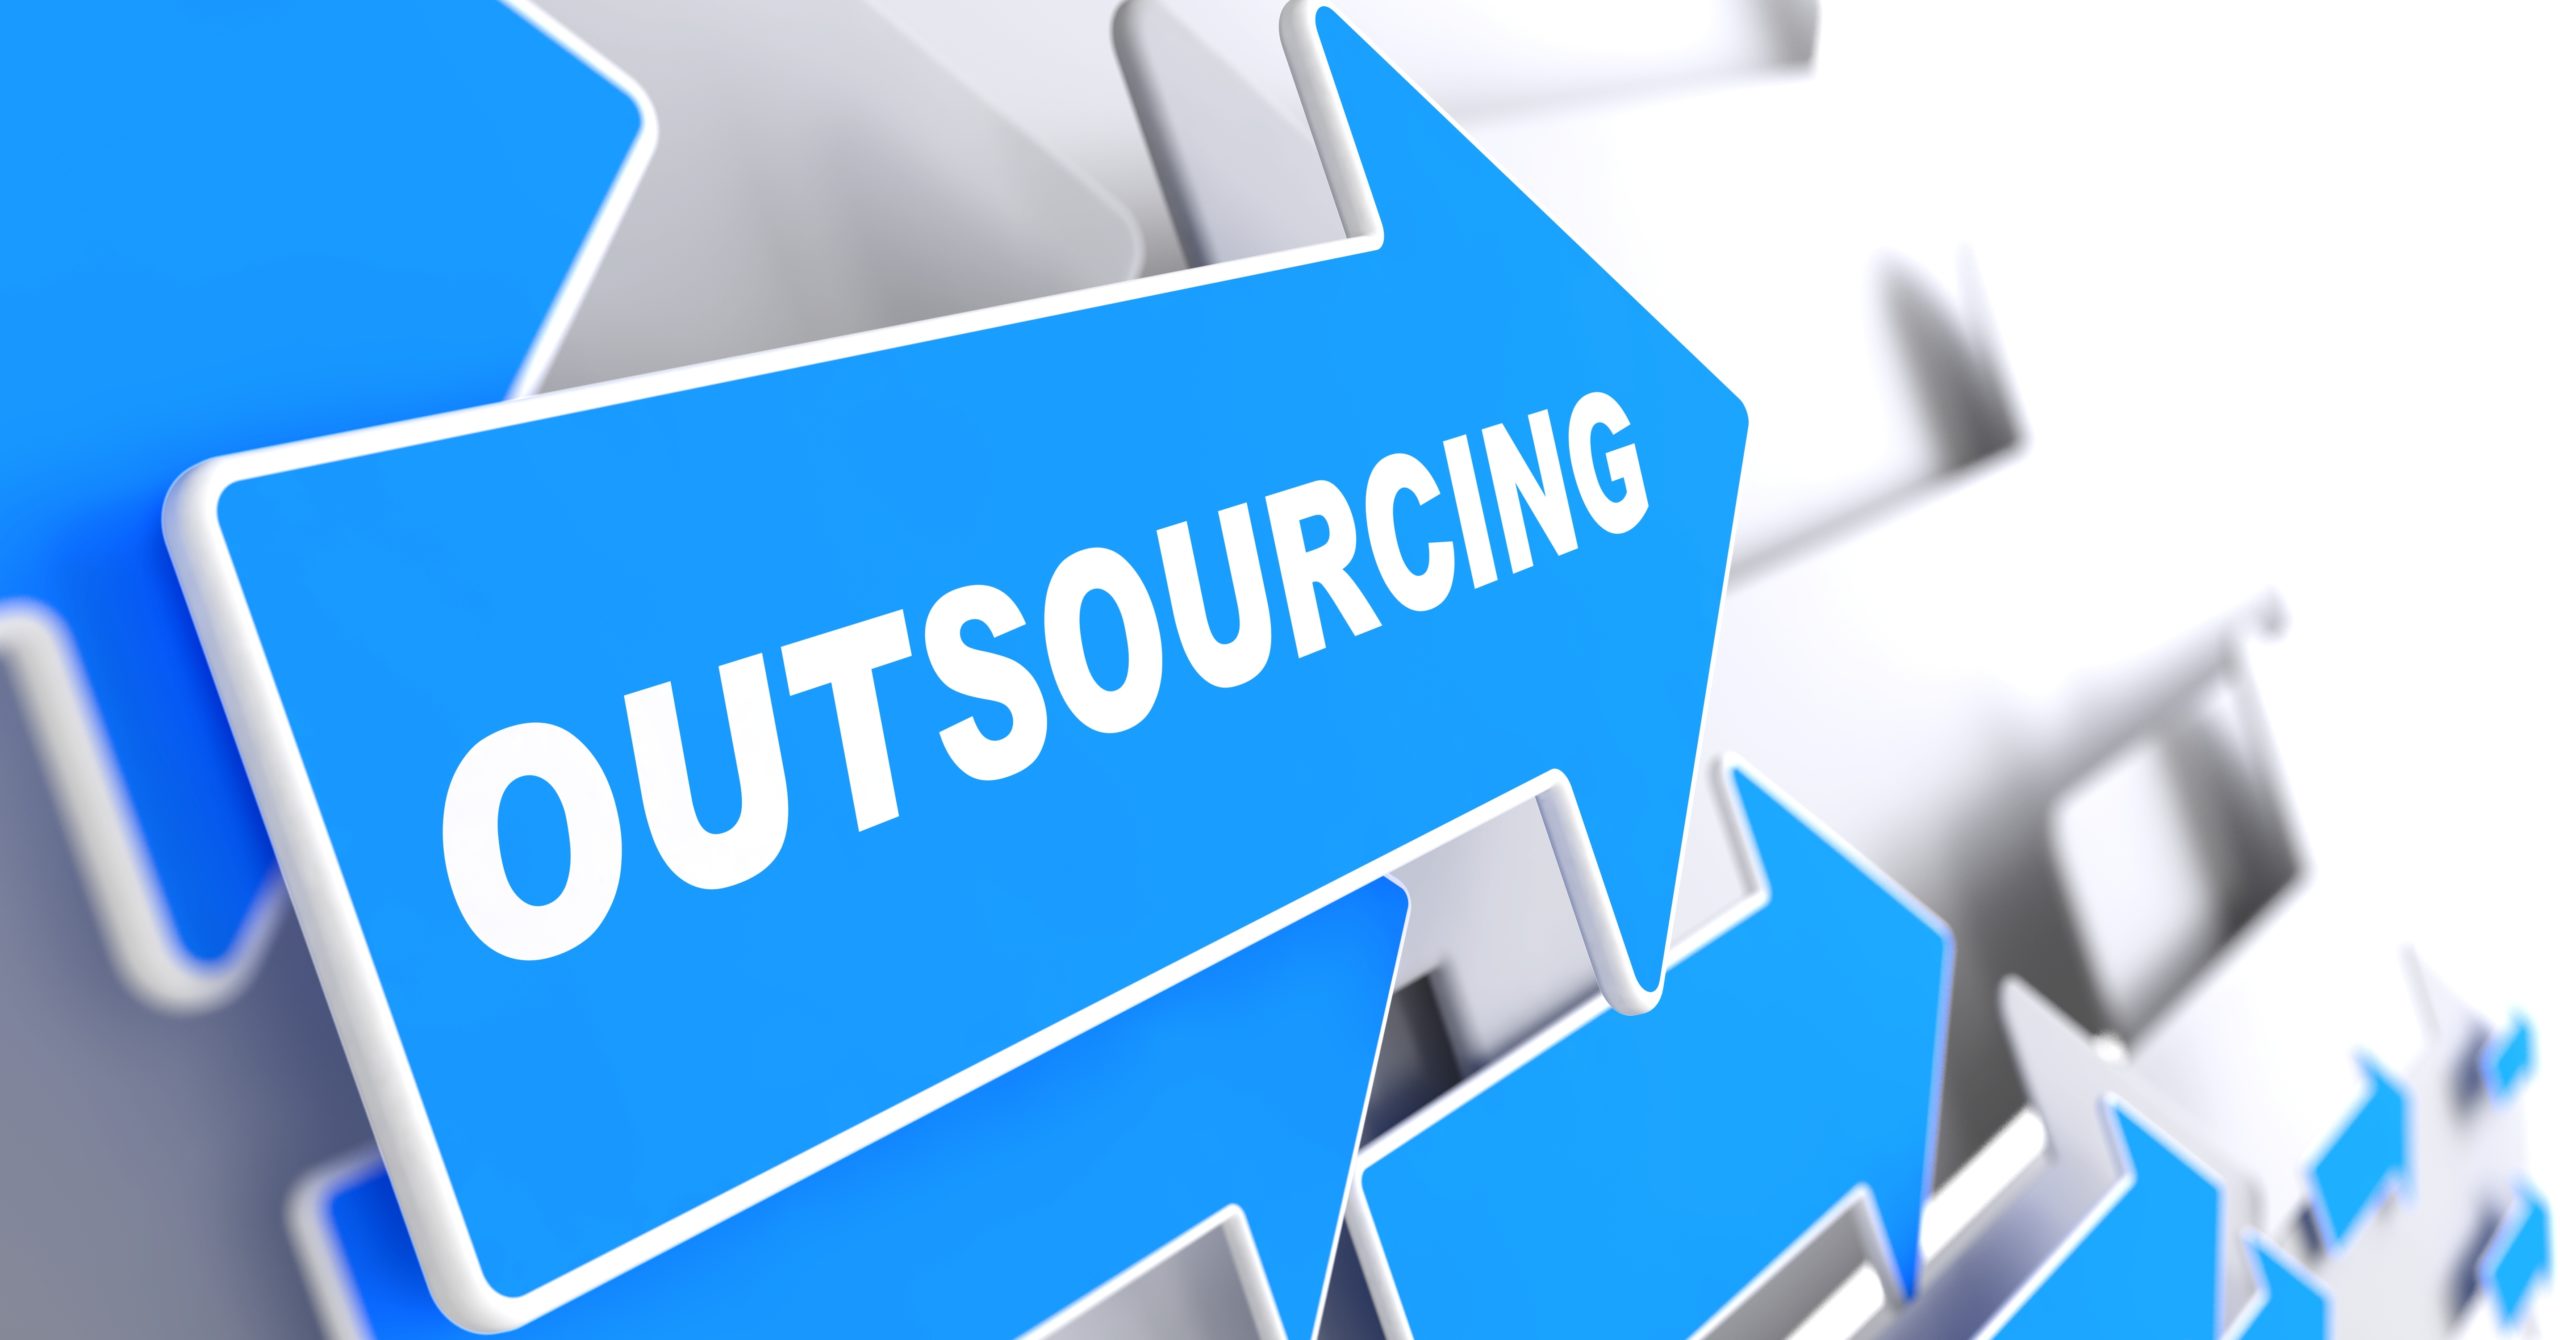 Why Should CPA Firms Outsource Bookkeeping Services to India?